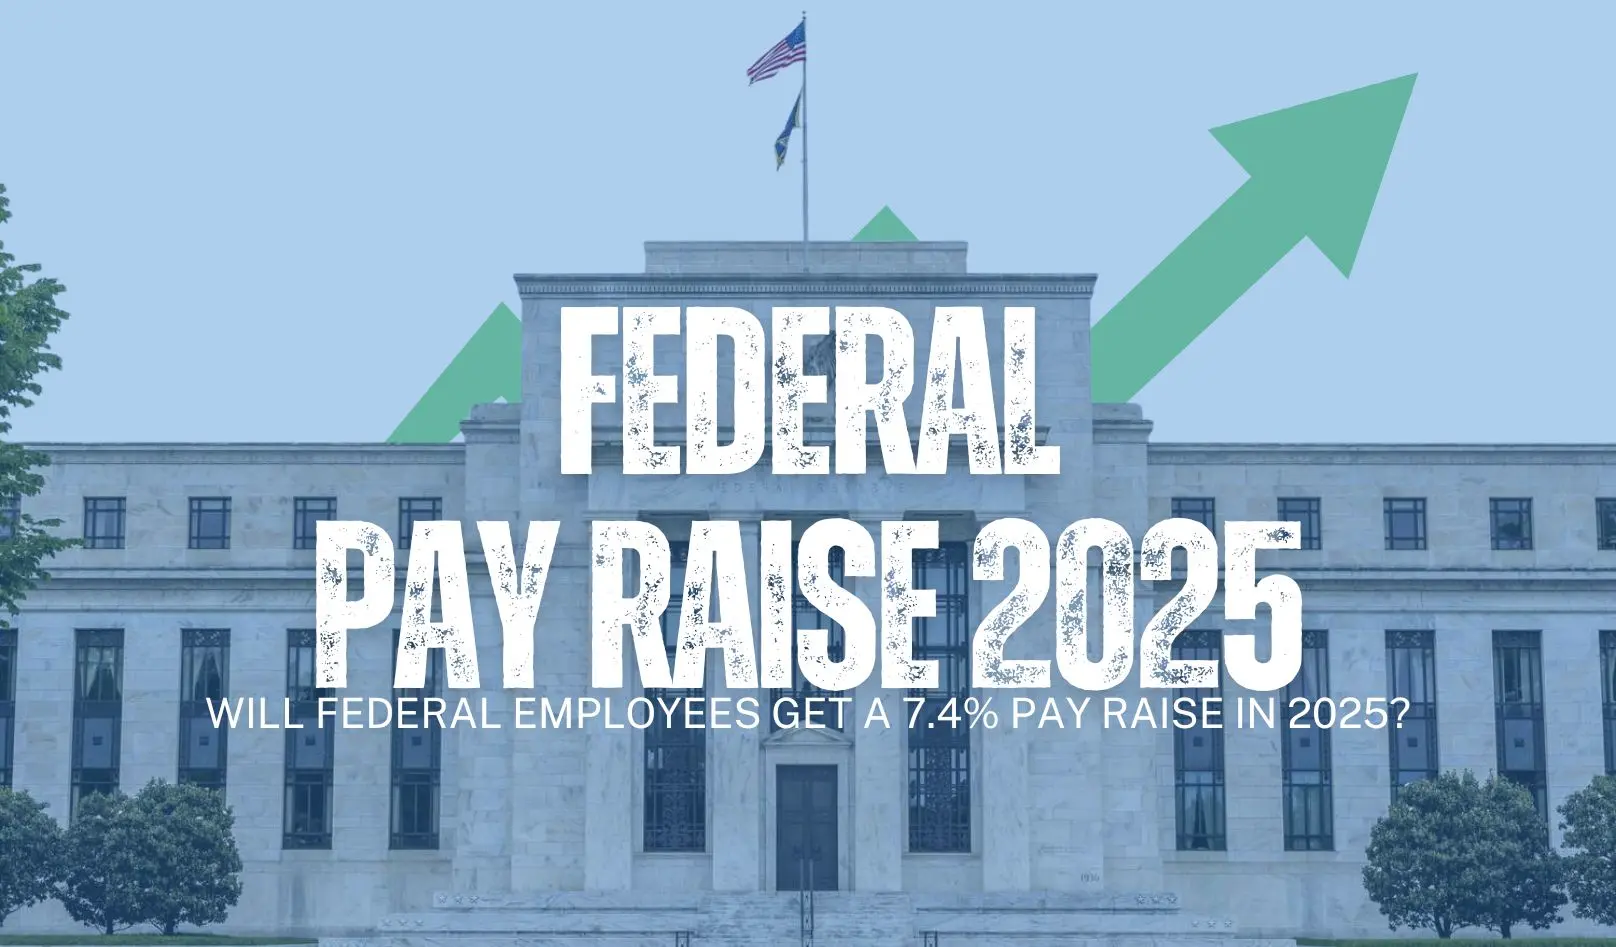 Will Federal Employees Get a 7.4 Pay Raise in 2025?